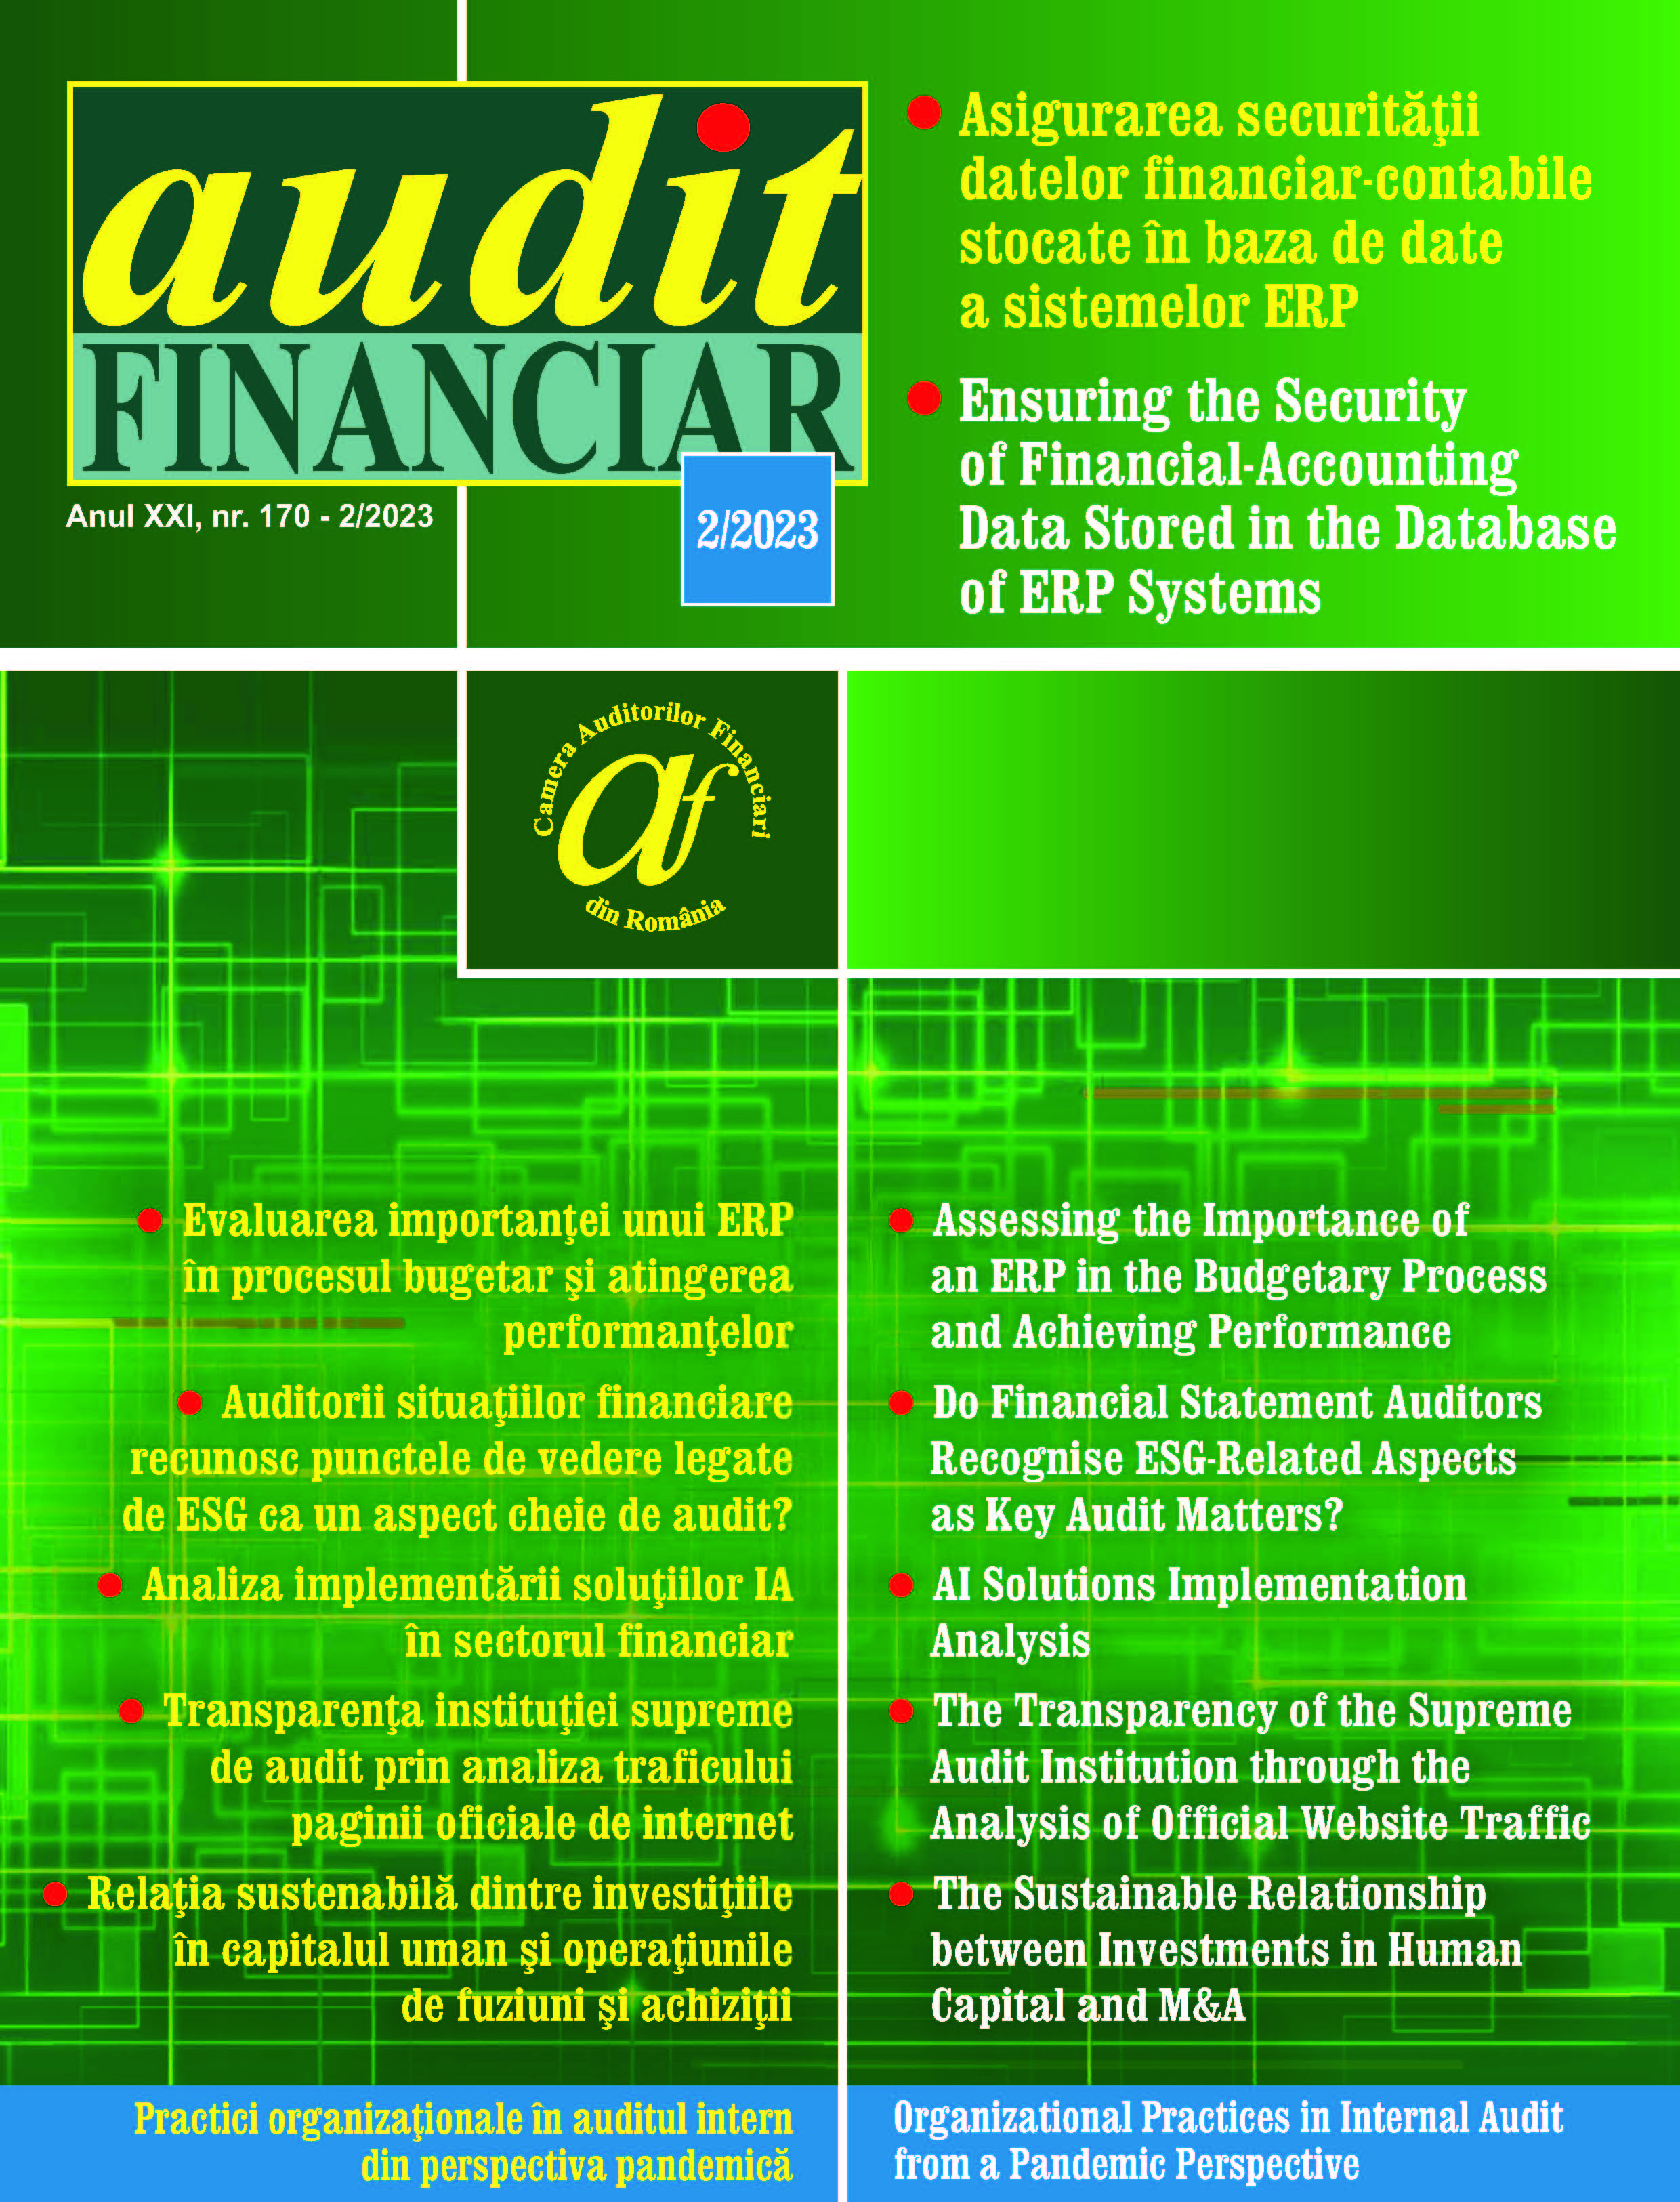 Assessing the Importance of an ERP in the Budgetary Process and Achieving Performance – Bibliometric Analysis Cover Image